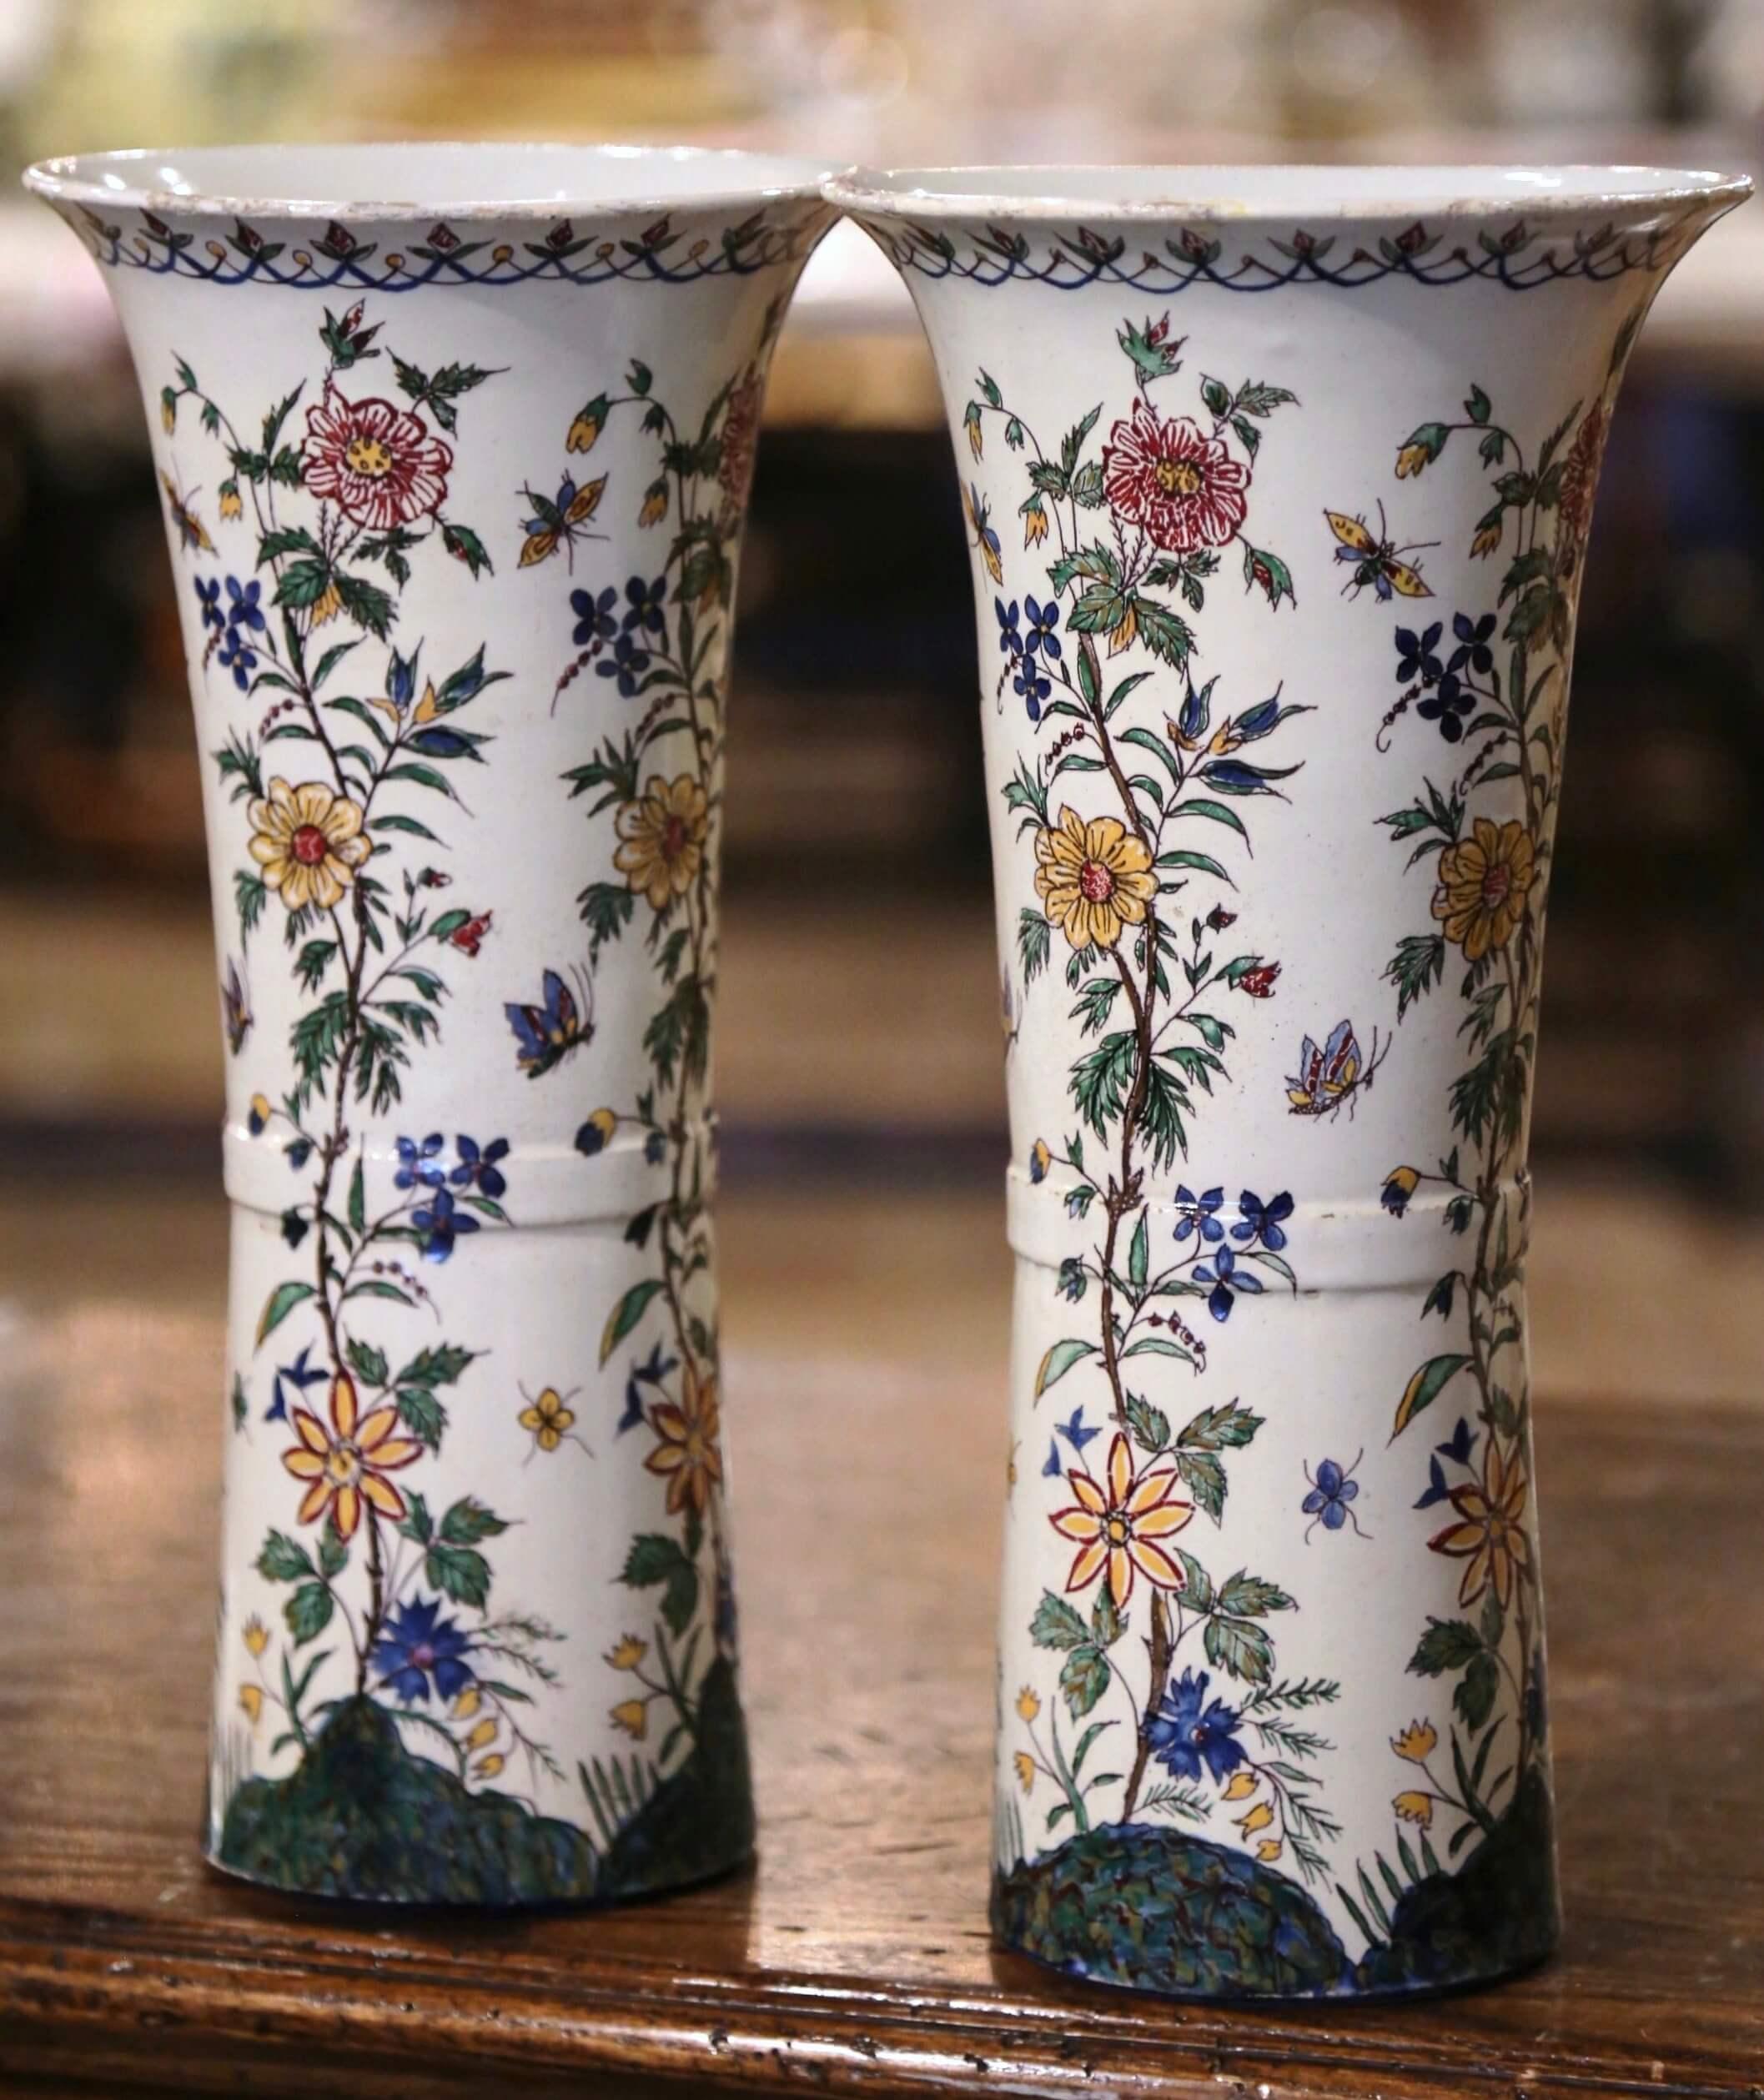 Incorporate beautiful colors into your home with this fine pair of antique ceramic vases from southern France. Crafted circa 1880, the vases are ornate in decoration yet simple in shape. The tall, colorful vases feature a circular bottom and a wide